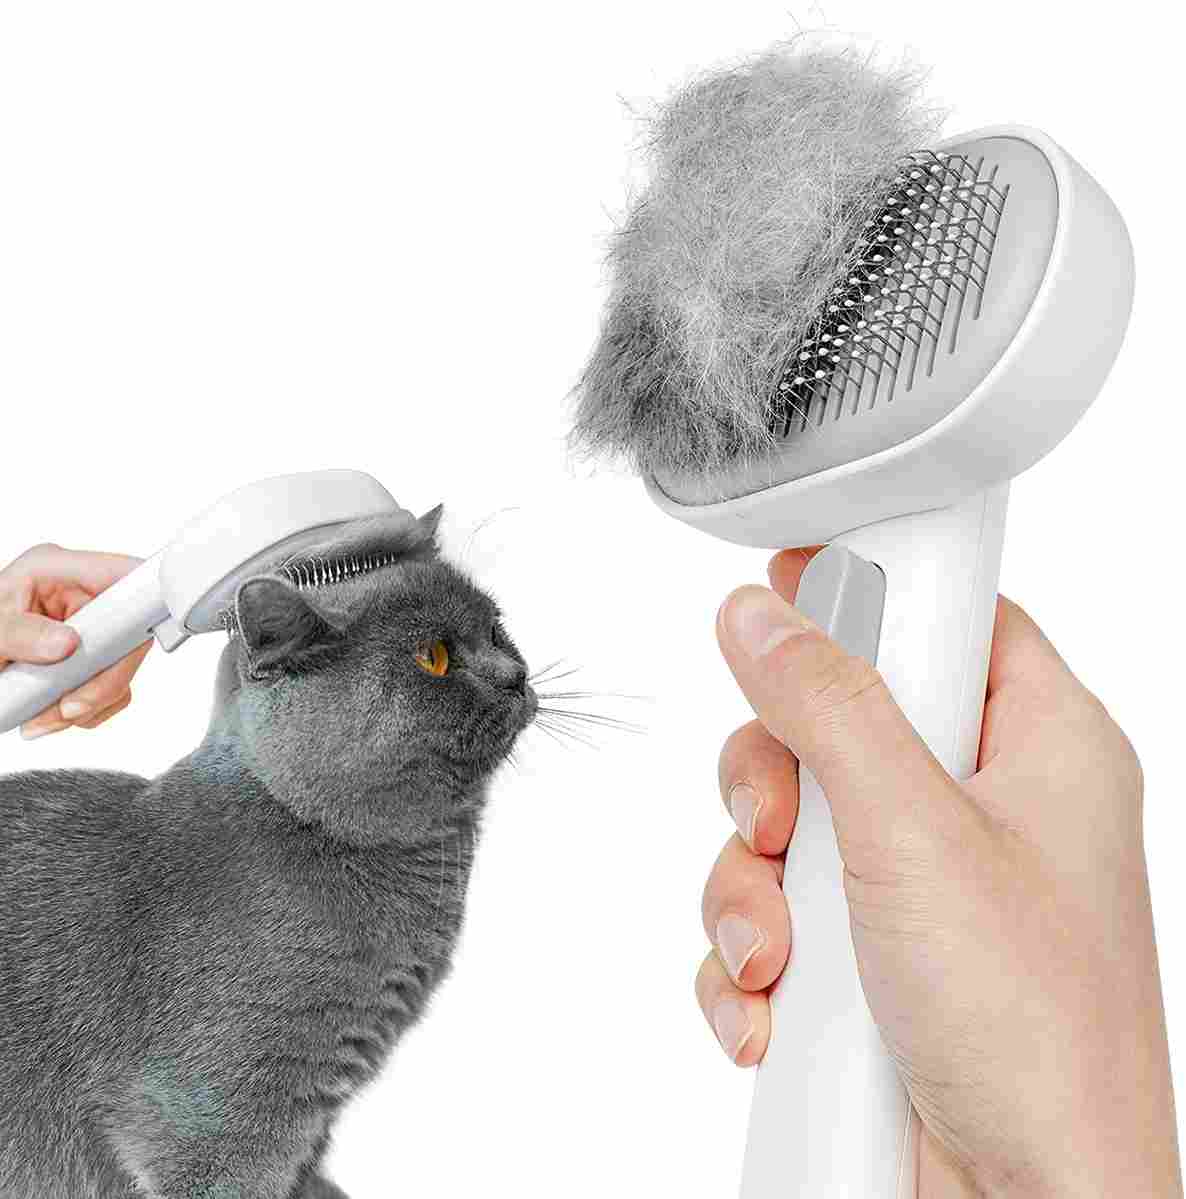 Aumuca Cat Brush for Shedding, Cat Brushes for Indoor Cats, Cat Brush for Long or Short Haired Cats, Cat Grooming Brush Cat Comb for Kitten Rabbit Massage Removes Loose Fur